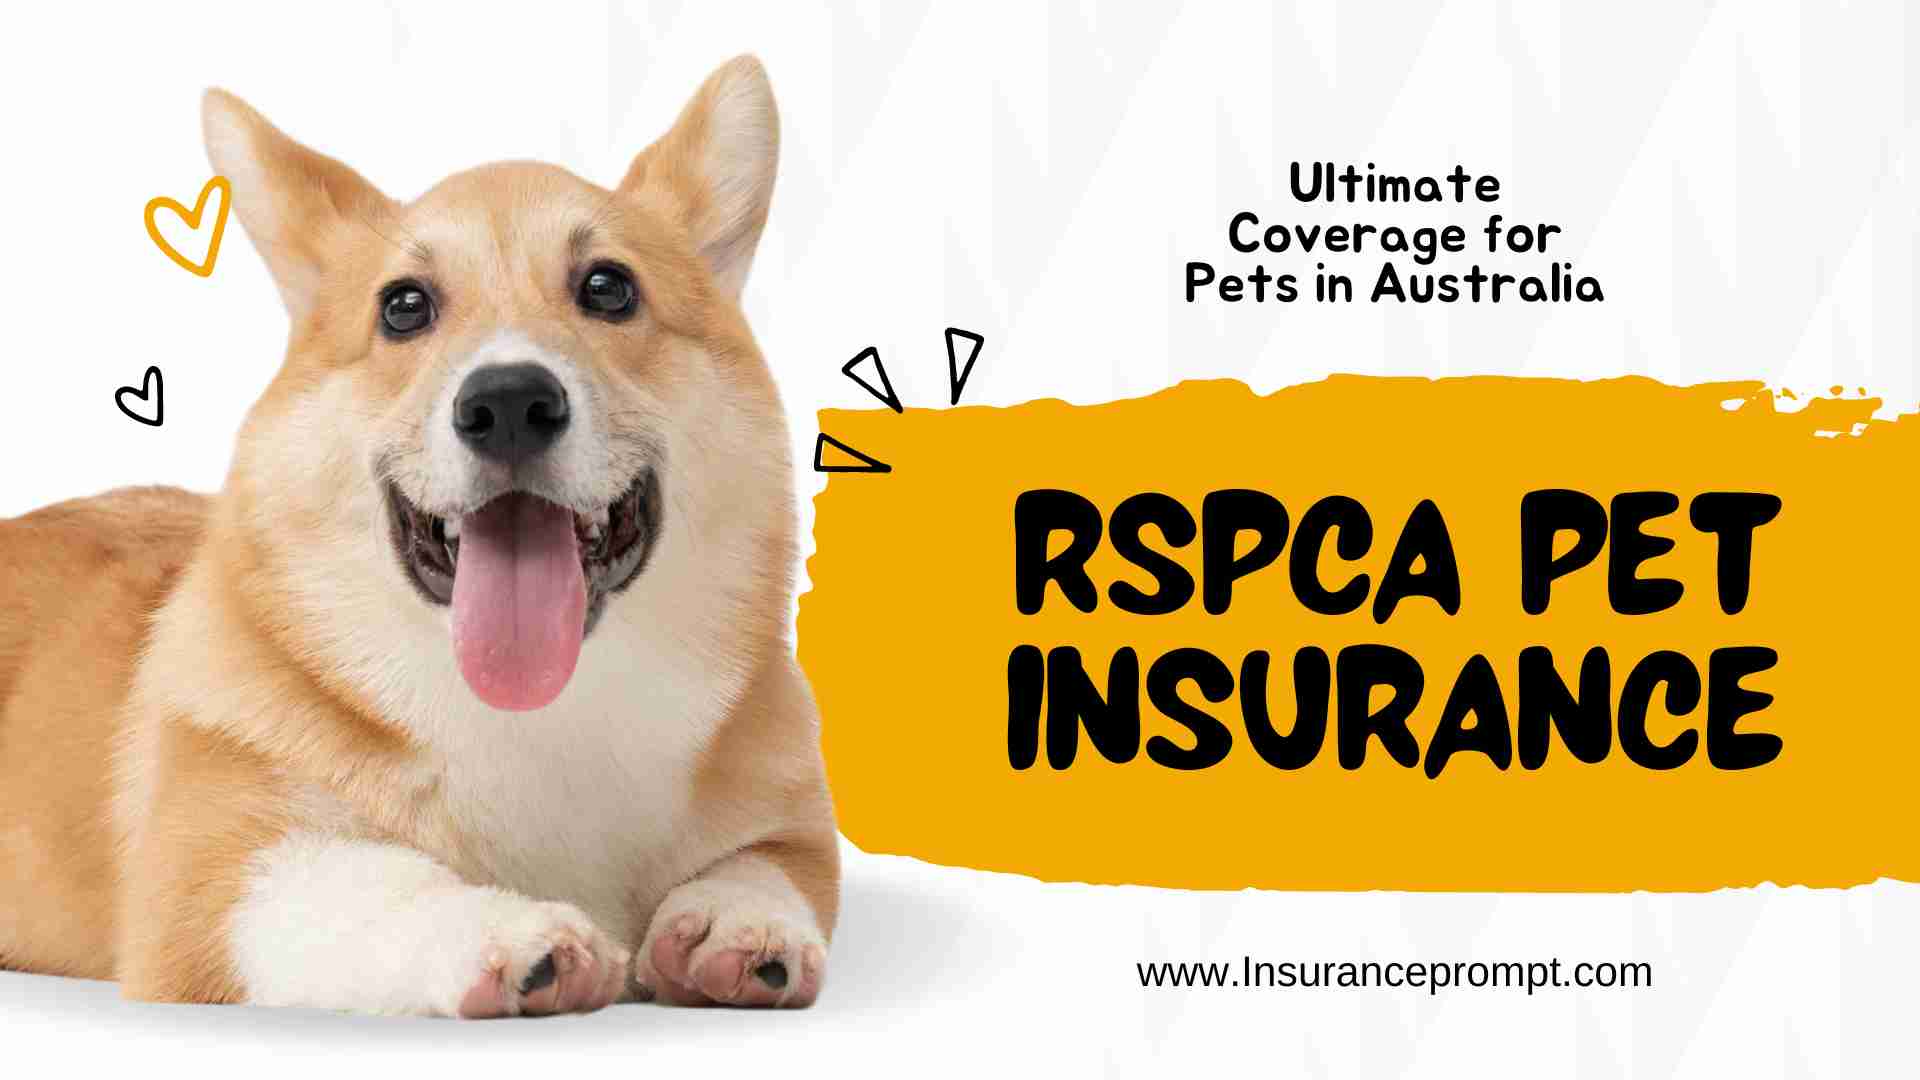 RSPCA Pet Insurance Ultimate Coverage for pets in Australia